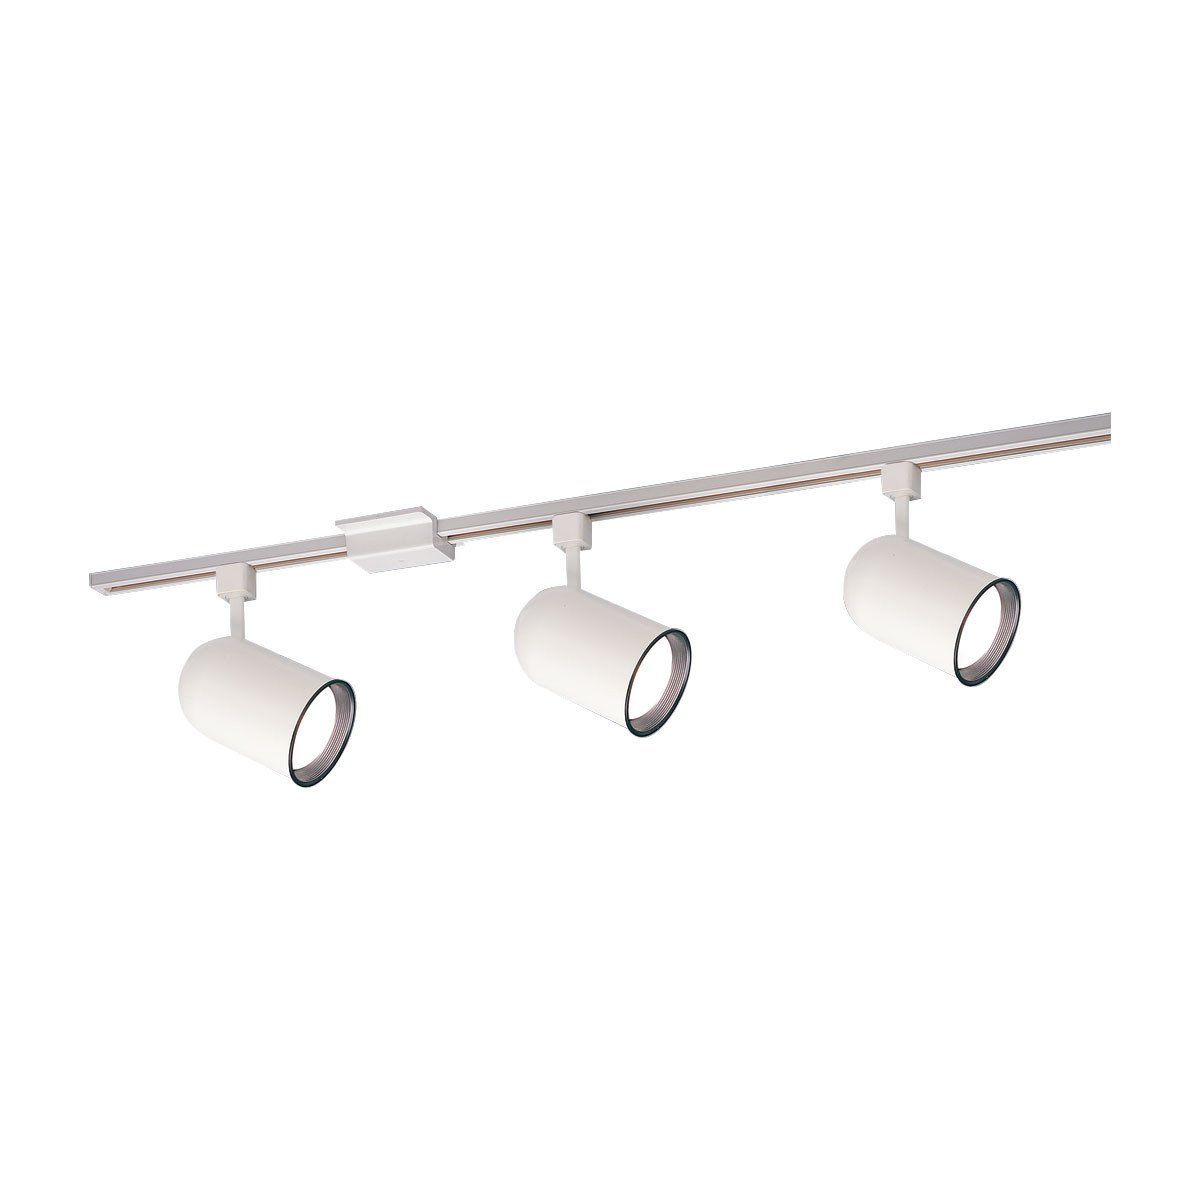 Line Voltage Round Back Track Pack, 4 Fixtures, White Tracks Nora Lighting 